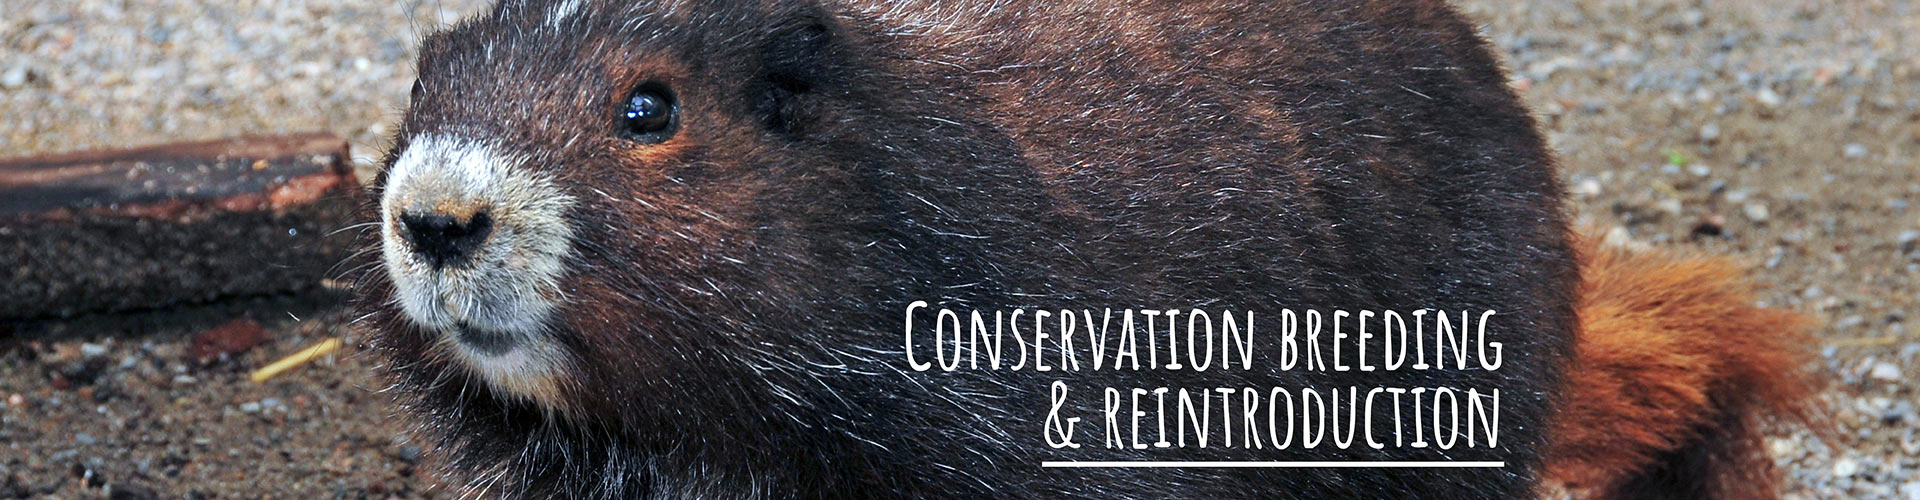 Conservation Breeding and Reintroduction - ELS